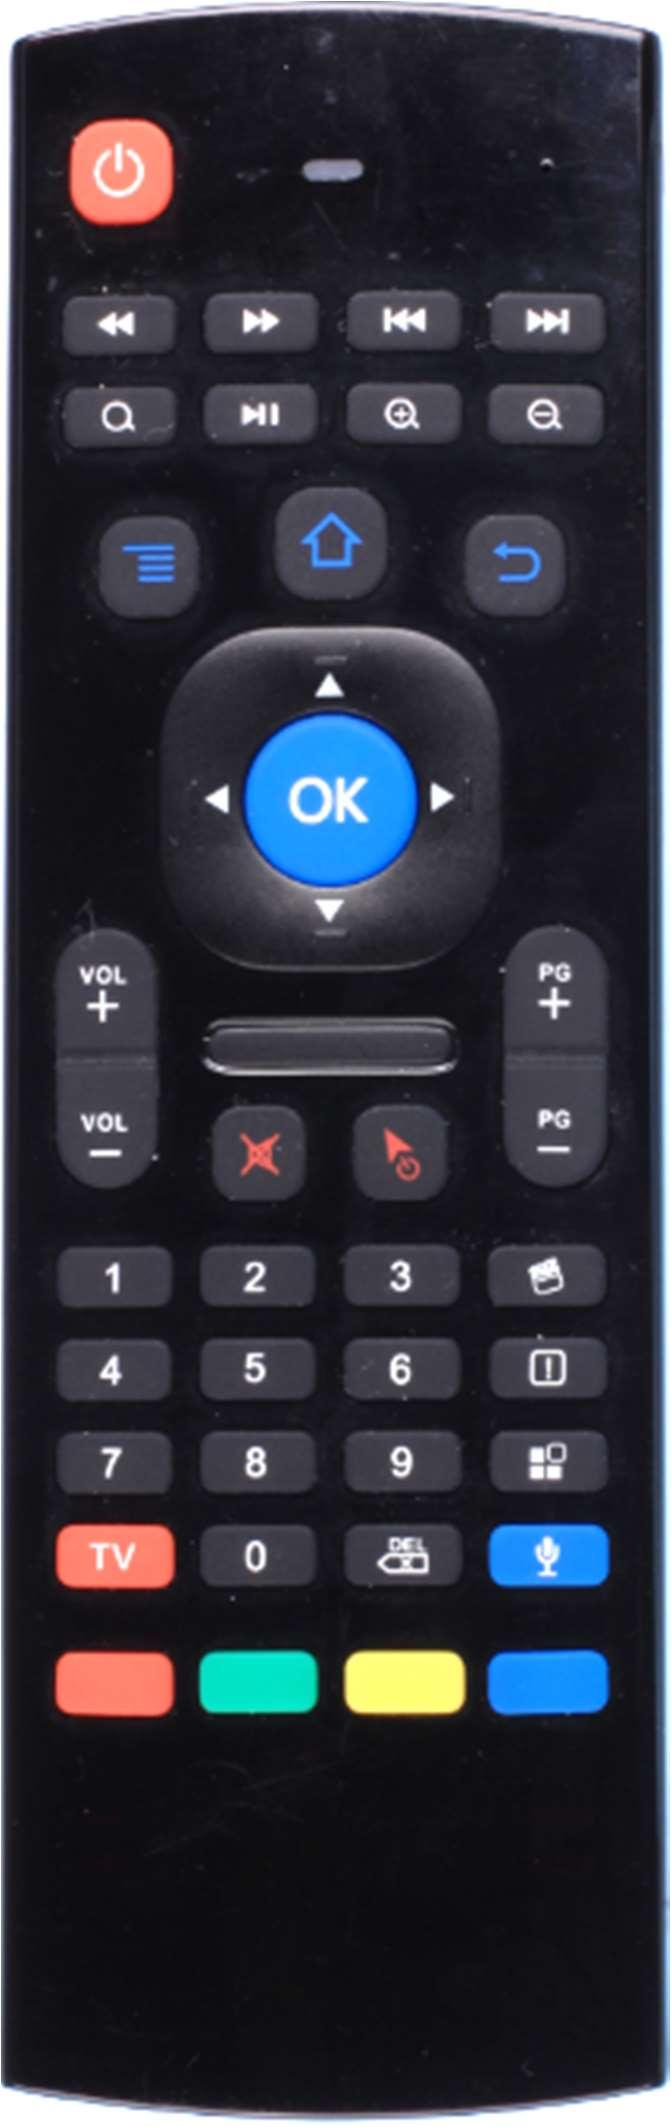 THE REMOTE CONTROL QUICK USER MANUAL MMC-P20plus 1 2 3 4 5 6 7 8 11 10 12 1 Power ON, Power OFF Rewind, Fast forward 2 Previous, Next 3 Search / Play Pause / Zoom In and Out 4 Menu, Home, back page